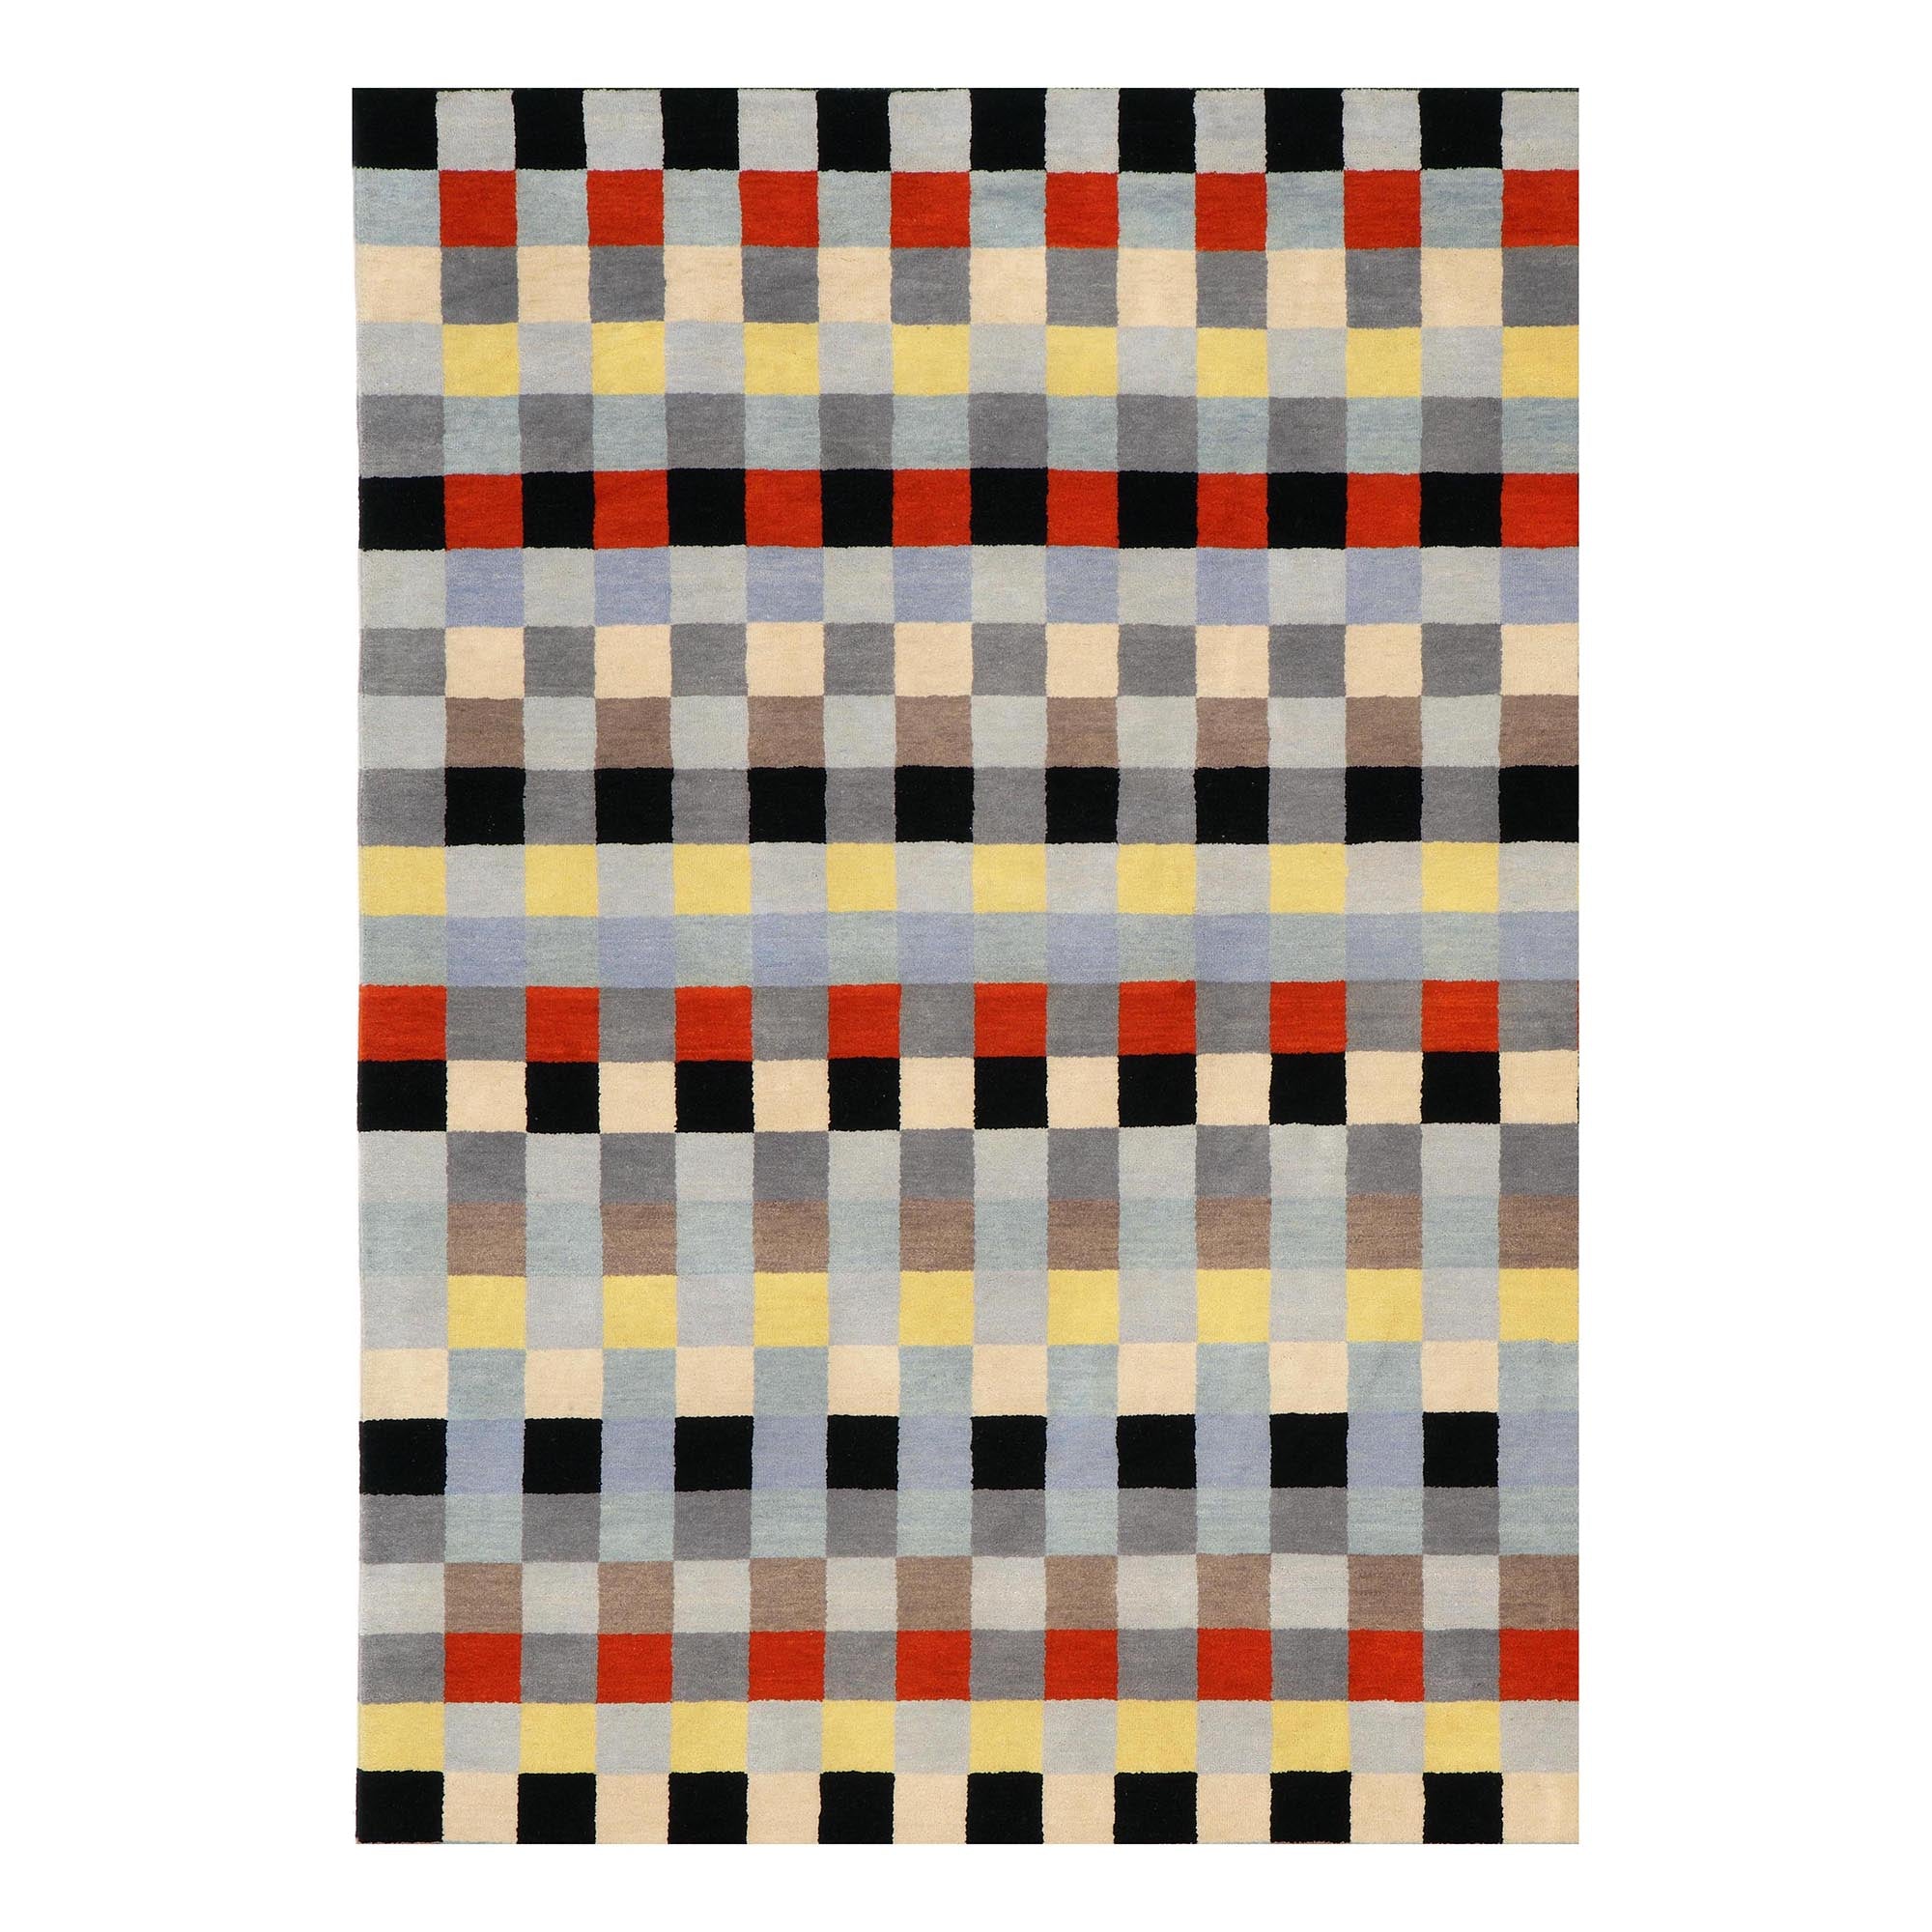 Small Childs Room - Anni Albers